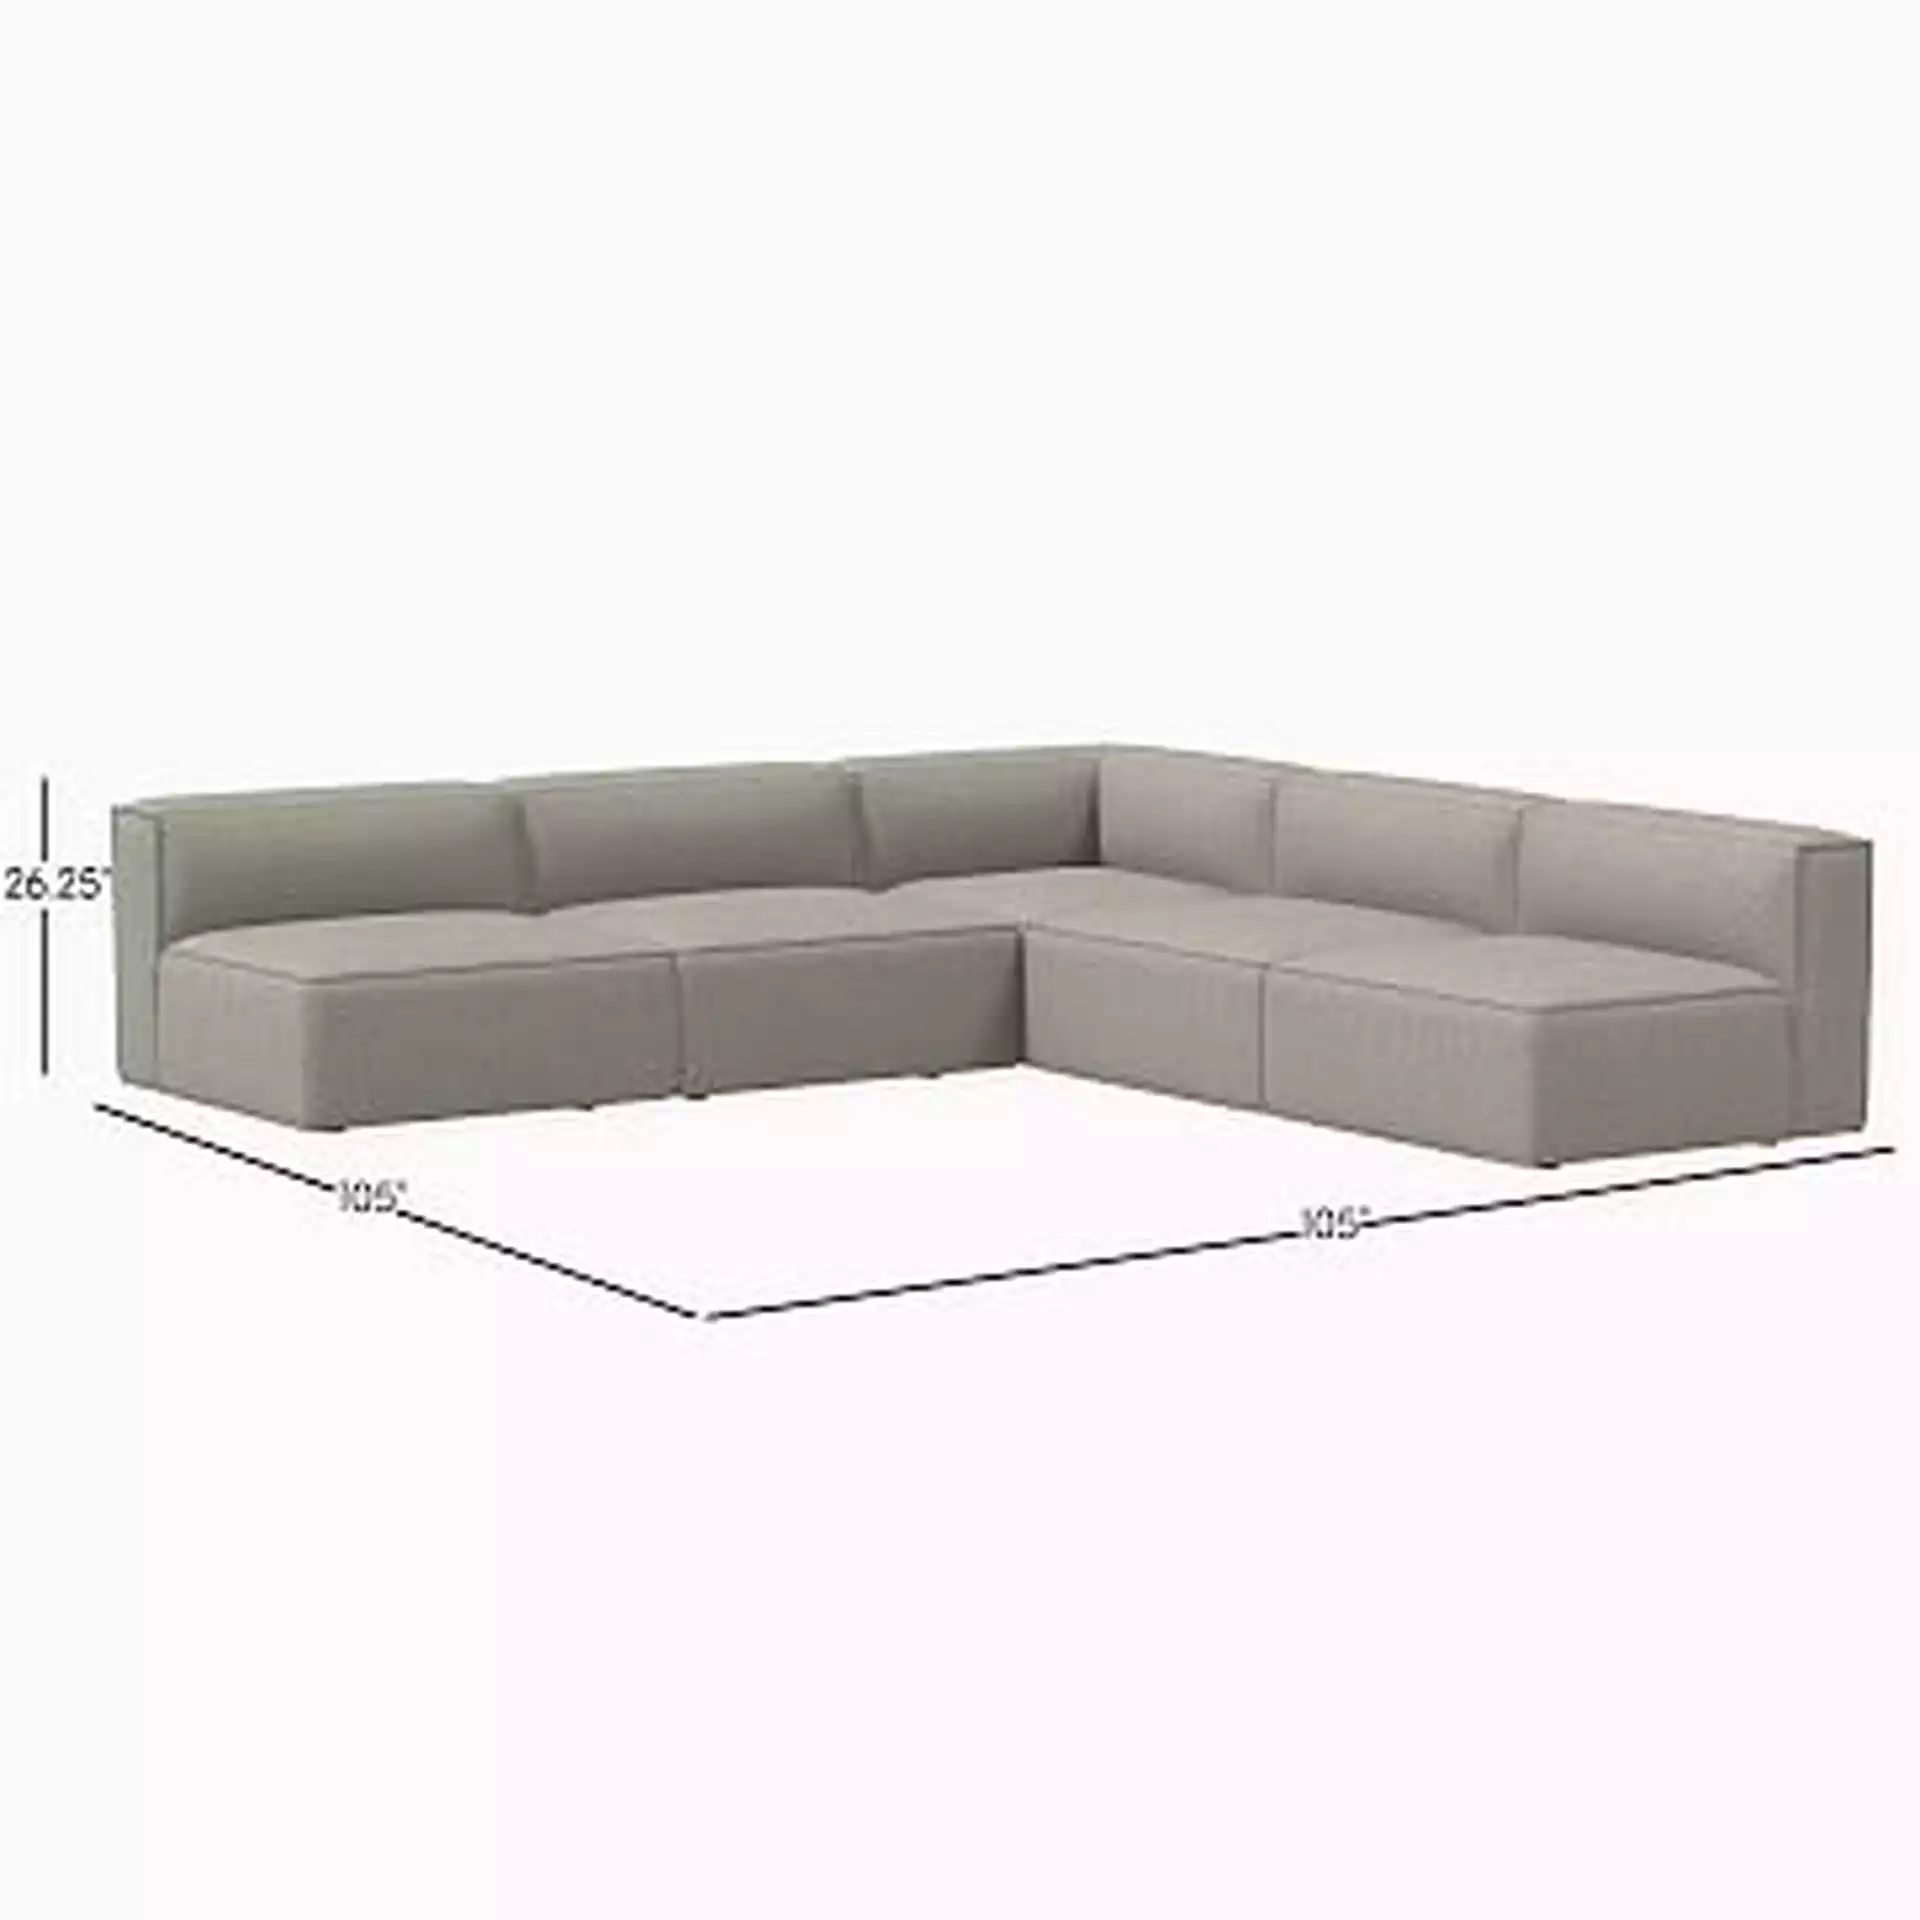 Remi Sectional Set 03: Remi Single, Remi Single, Remi Corner, Remi Single, Remi Single, Memory Foam, Deco Weave, Pearl Gray, Concealed Support